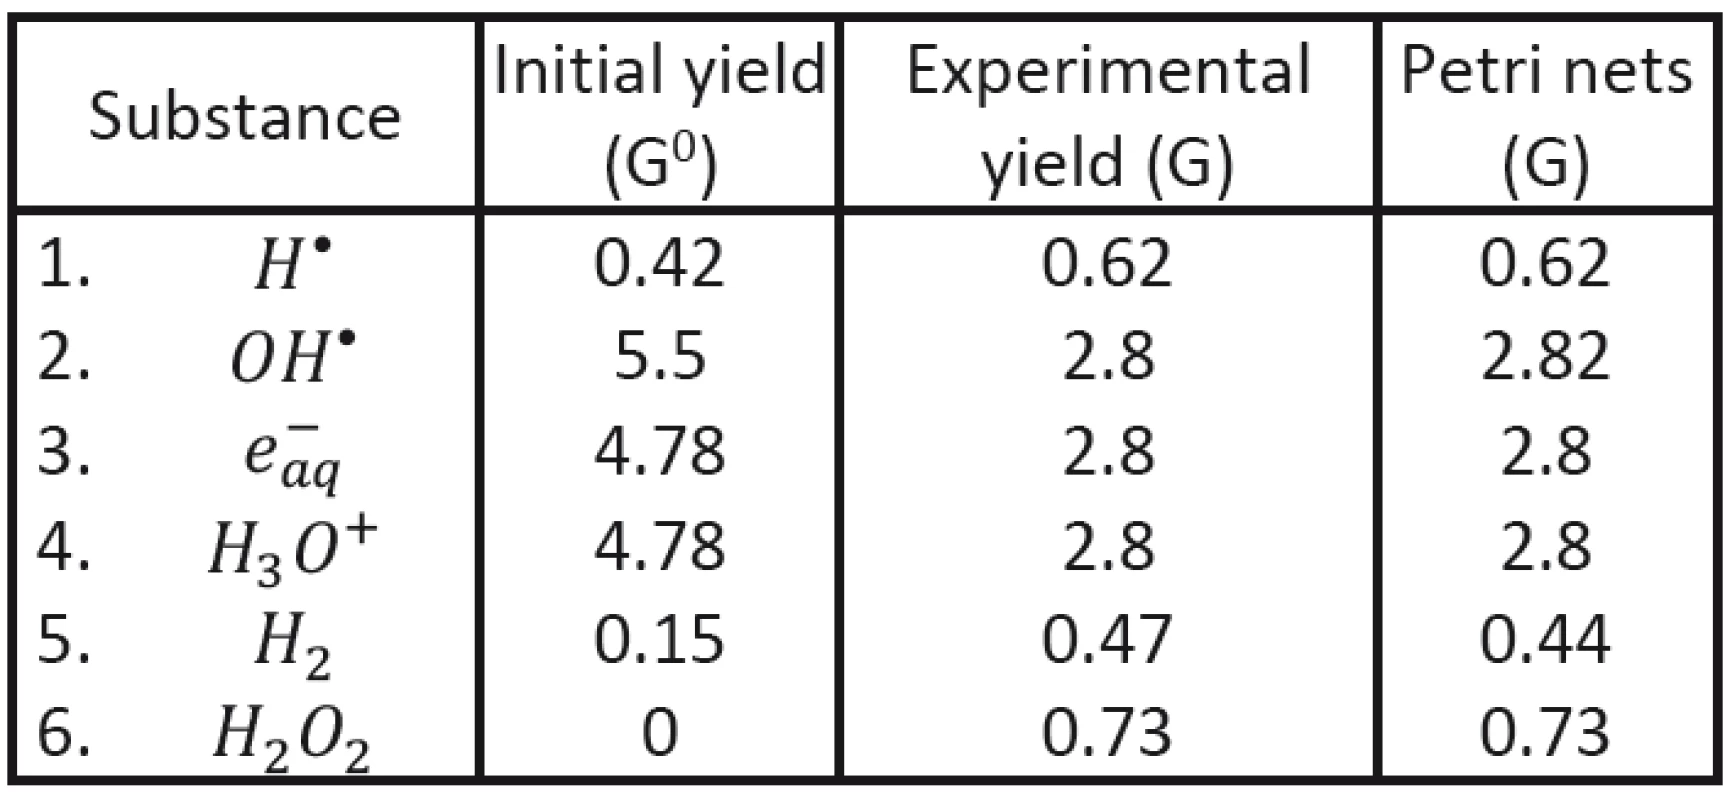 Comparison of the calculated final yield values with experimental results.